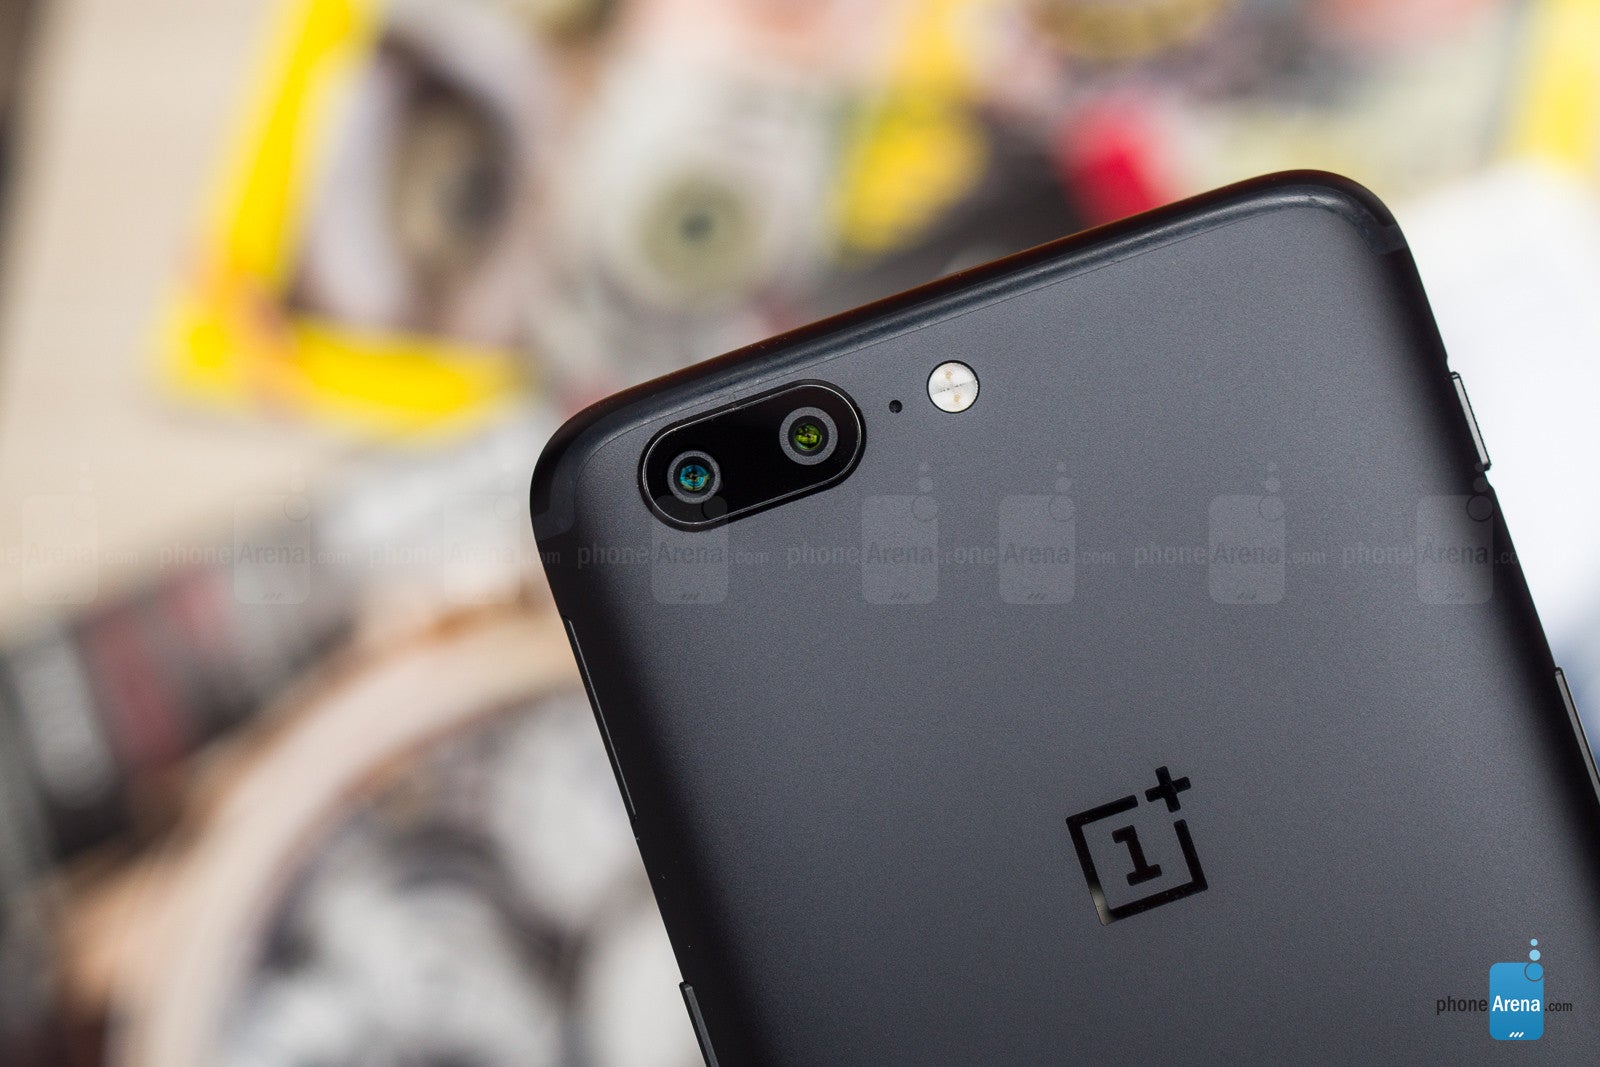 OnePlus 5 video stabilization update demoed in new official video